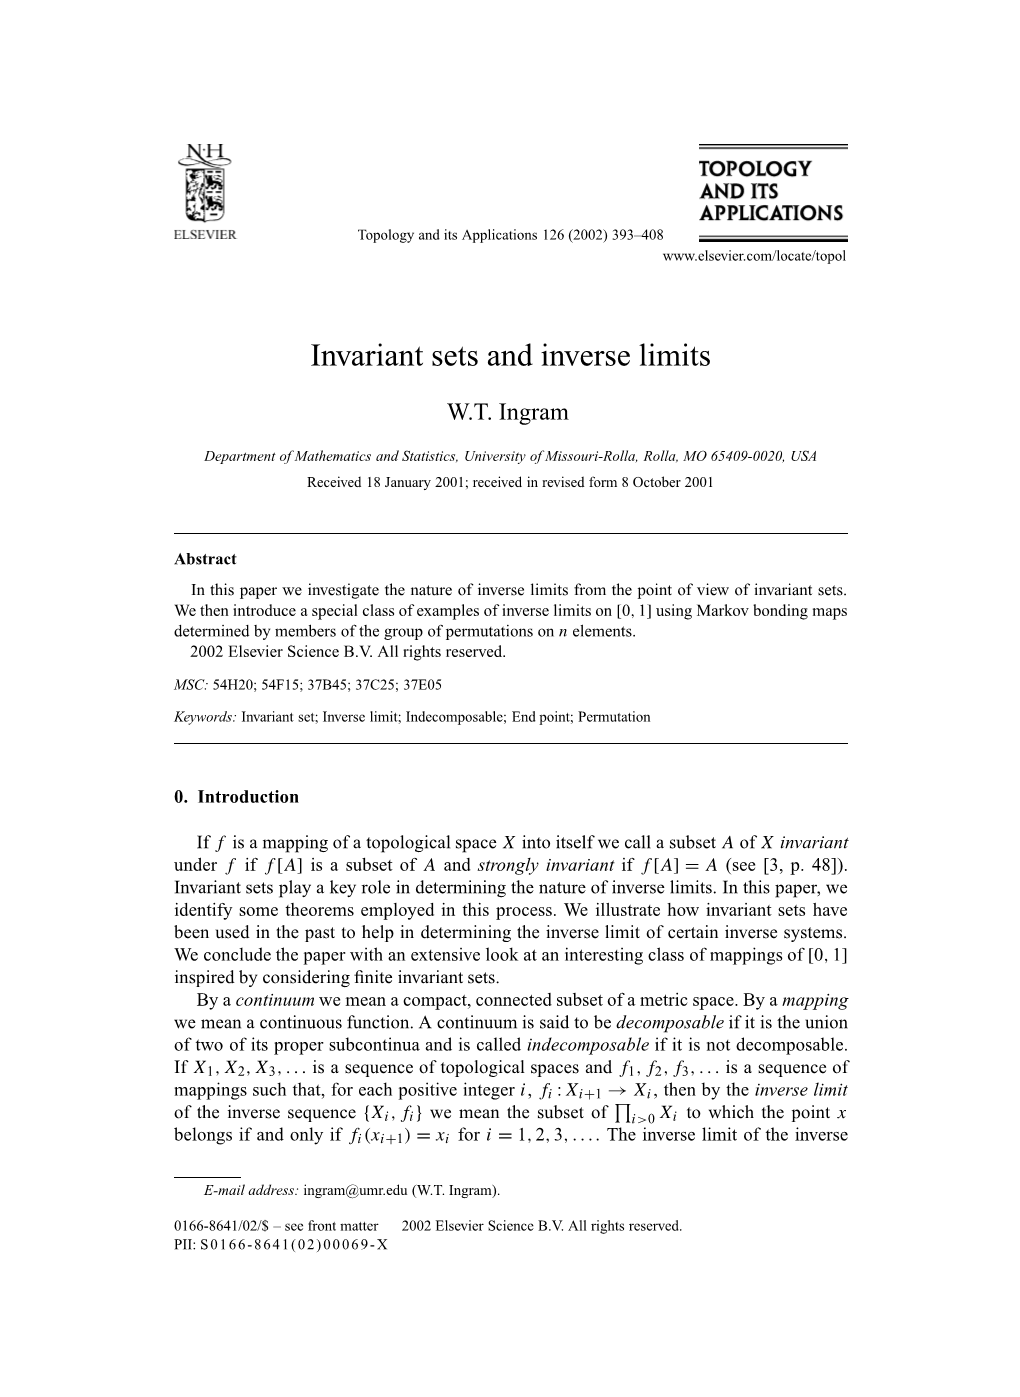 Invariant Sets and Inverse Limits